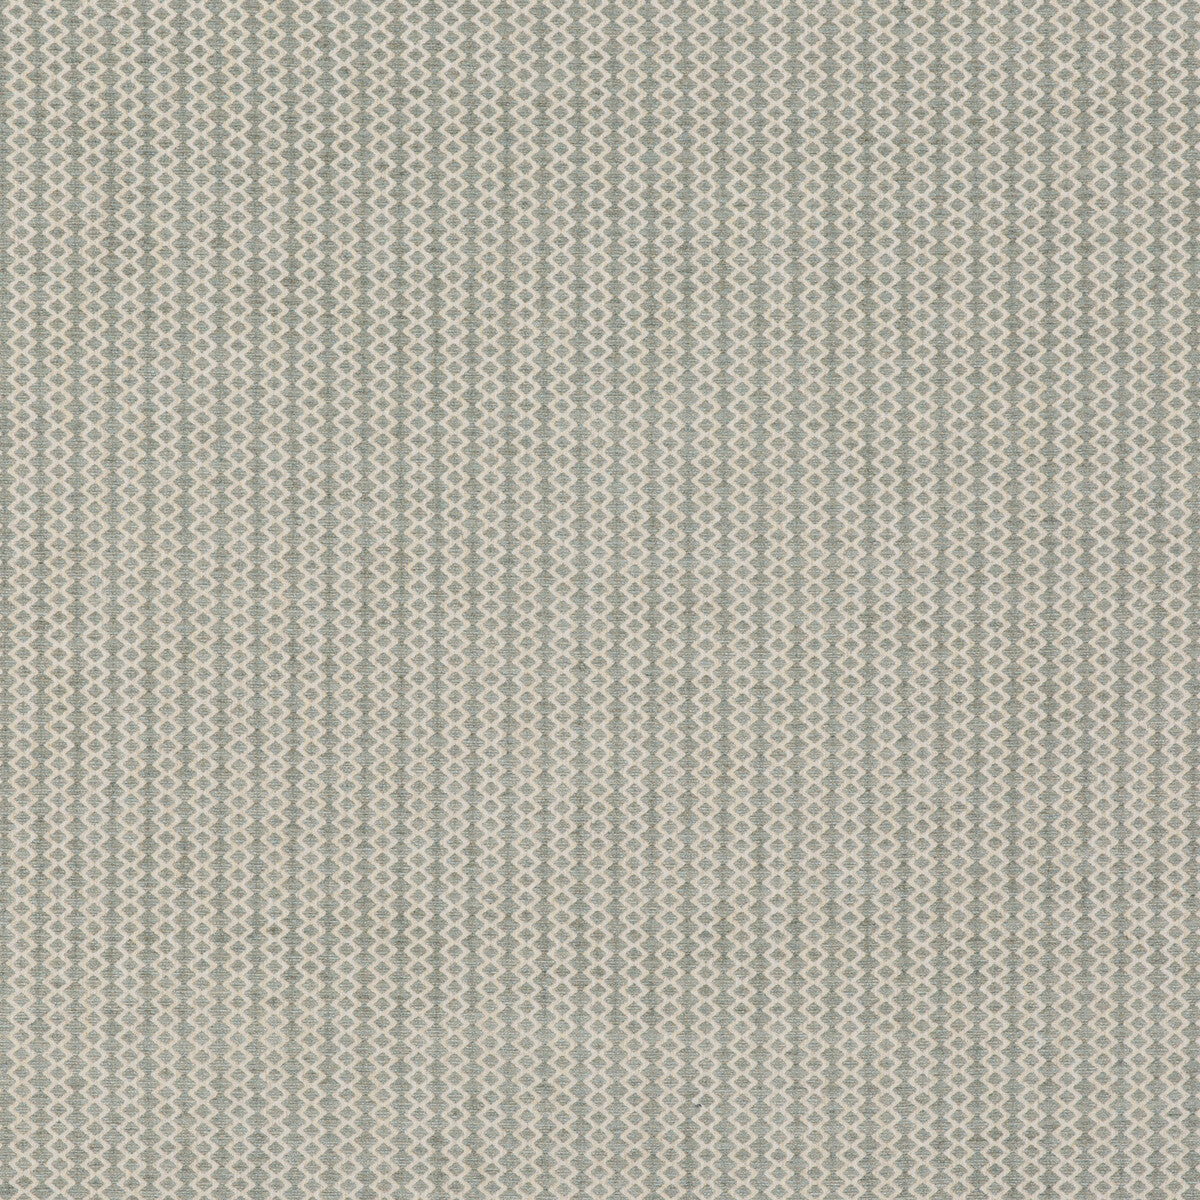 Harwood fabric in aqua color - pattern BF10958.725.0 - by G P &amp; J Baker in the Baker House Textures collection